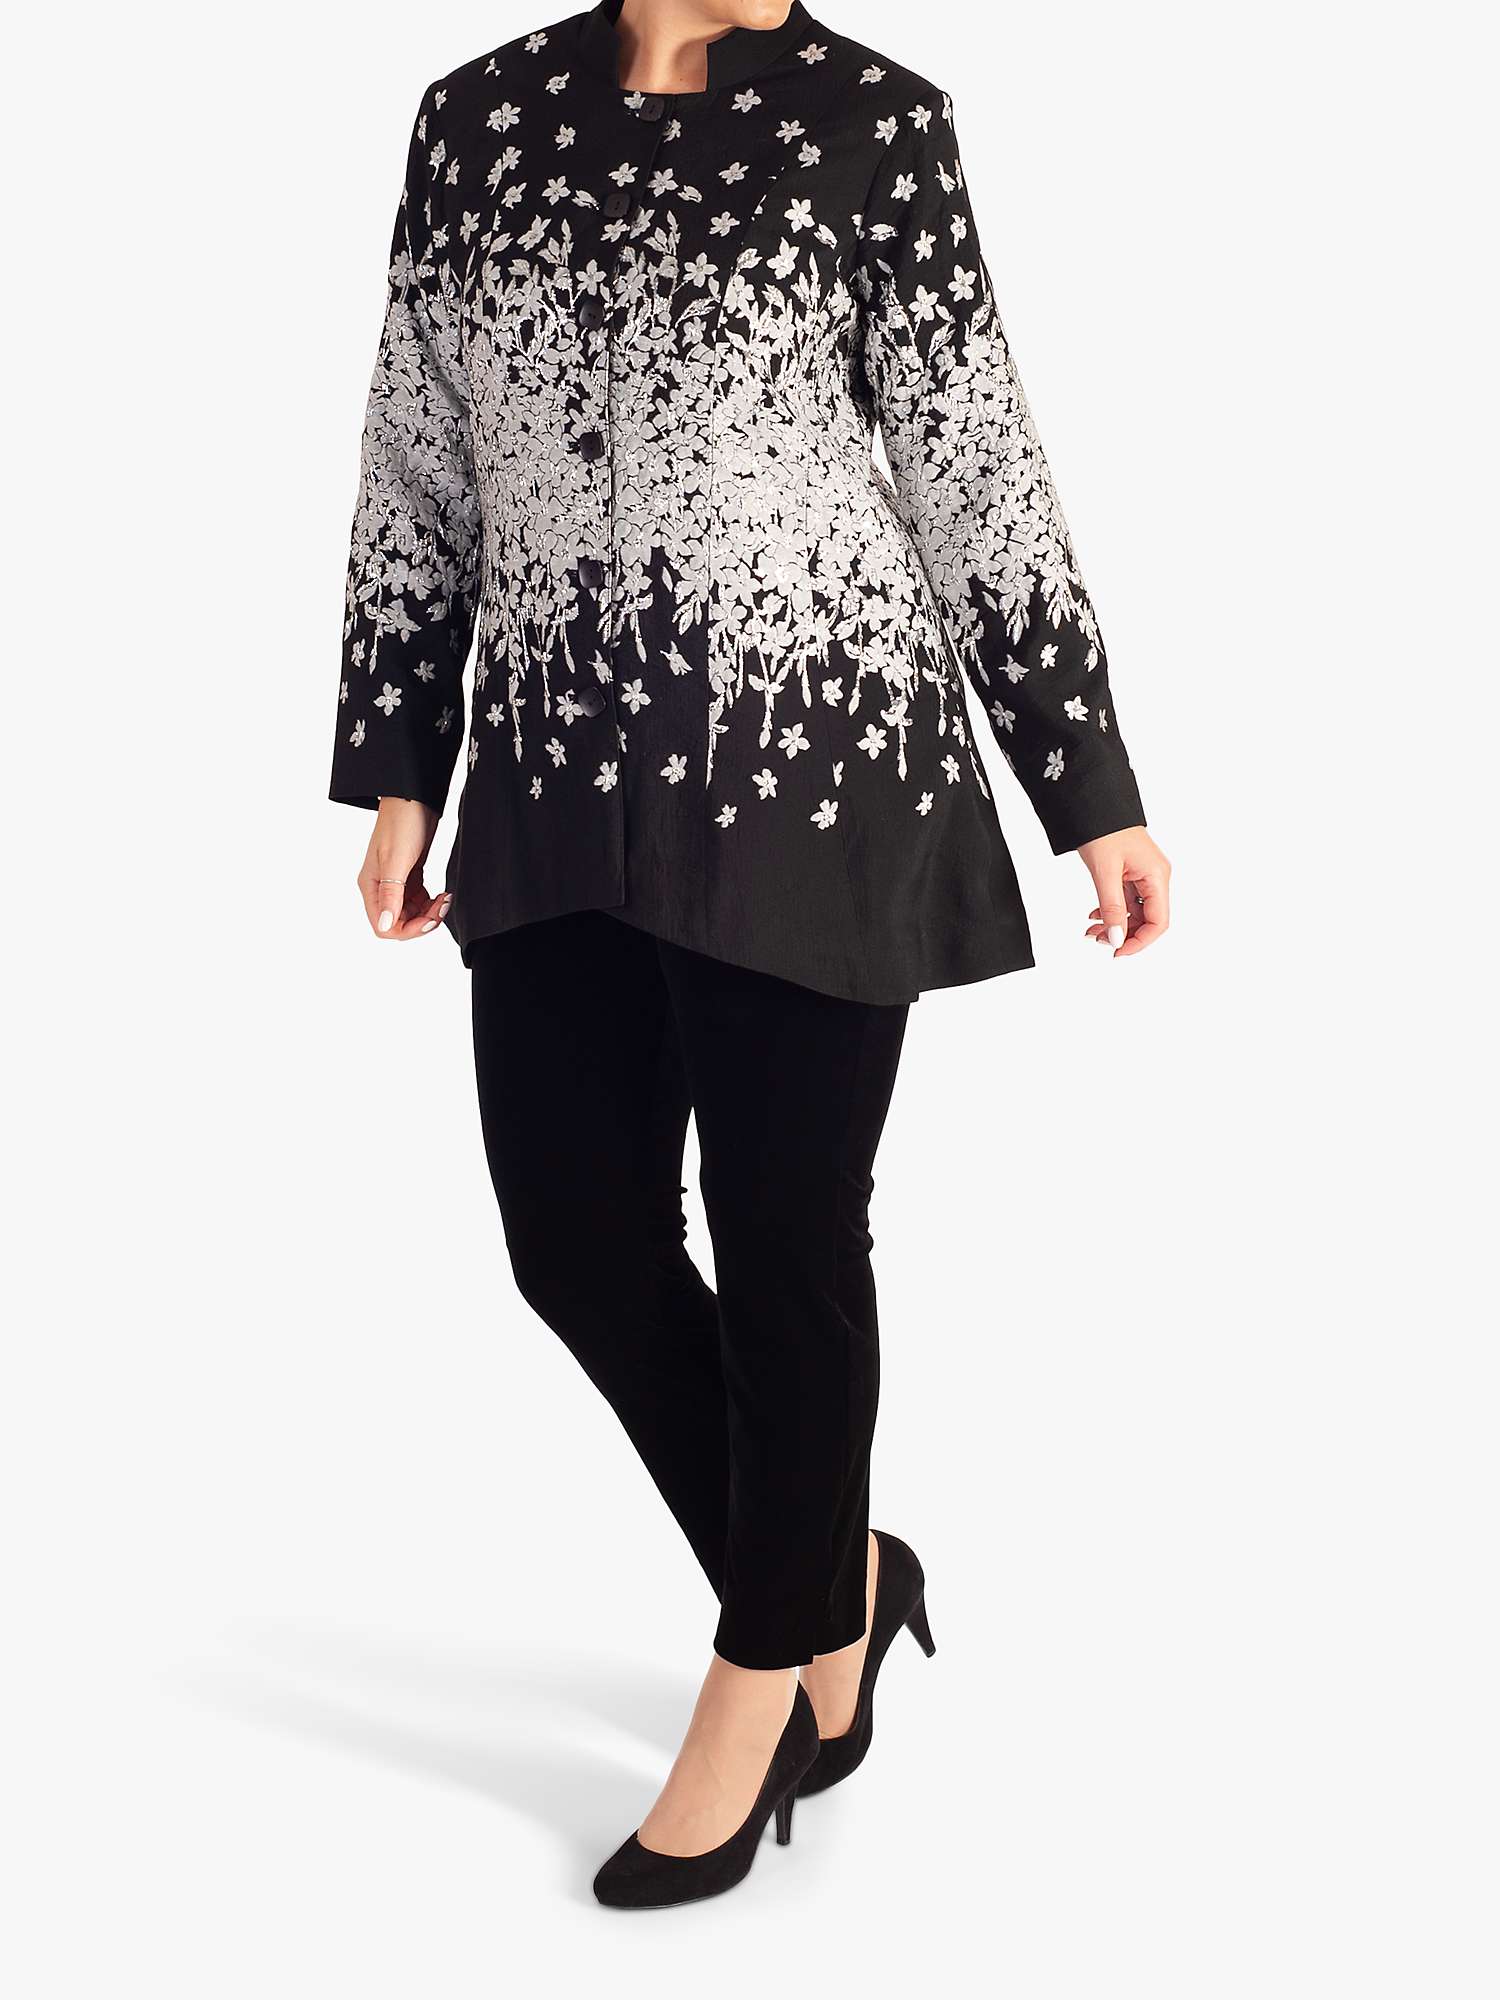 Buy chesca Floral Placement Jacquard Jacket Online at johnlewis.com